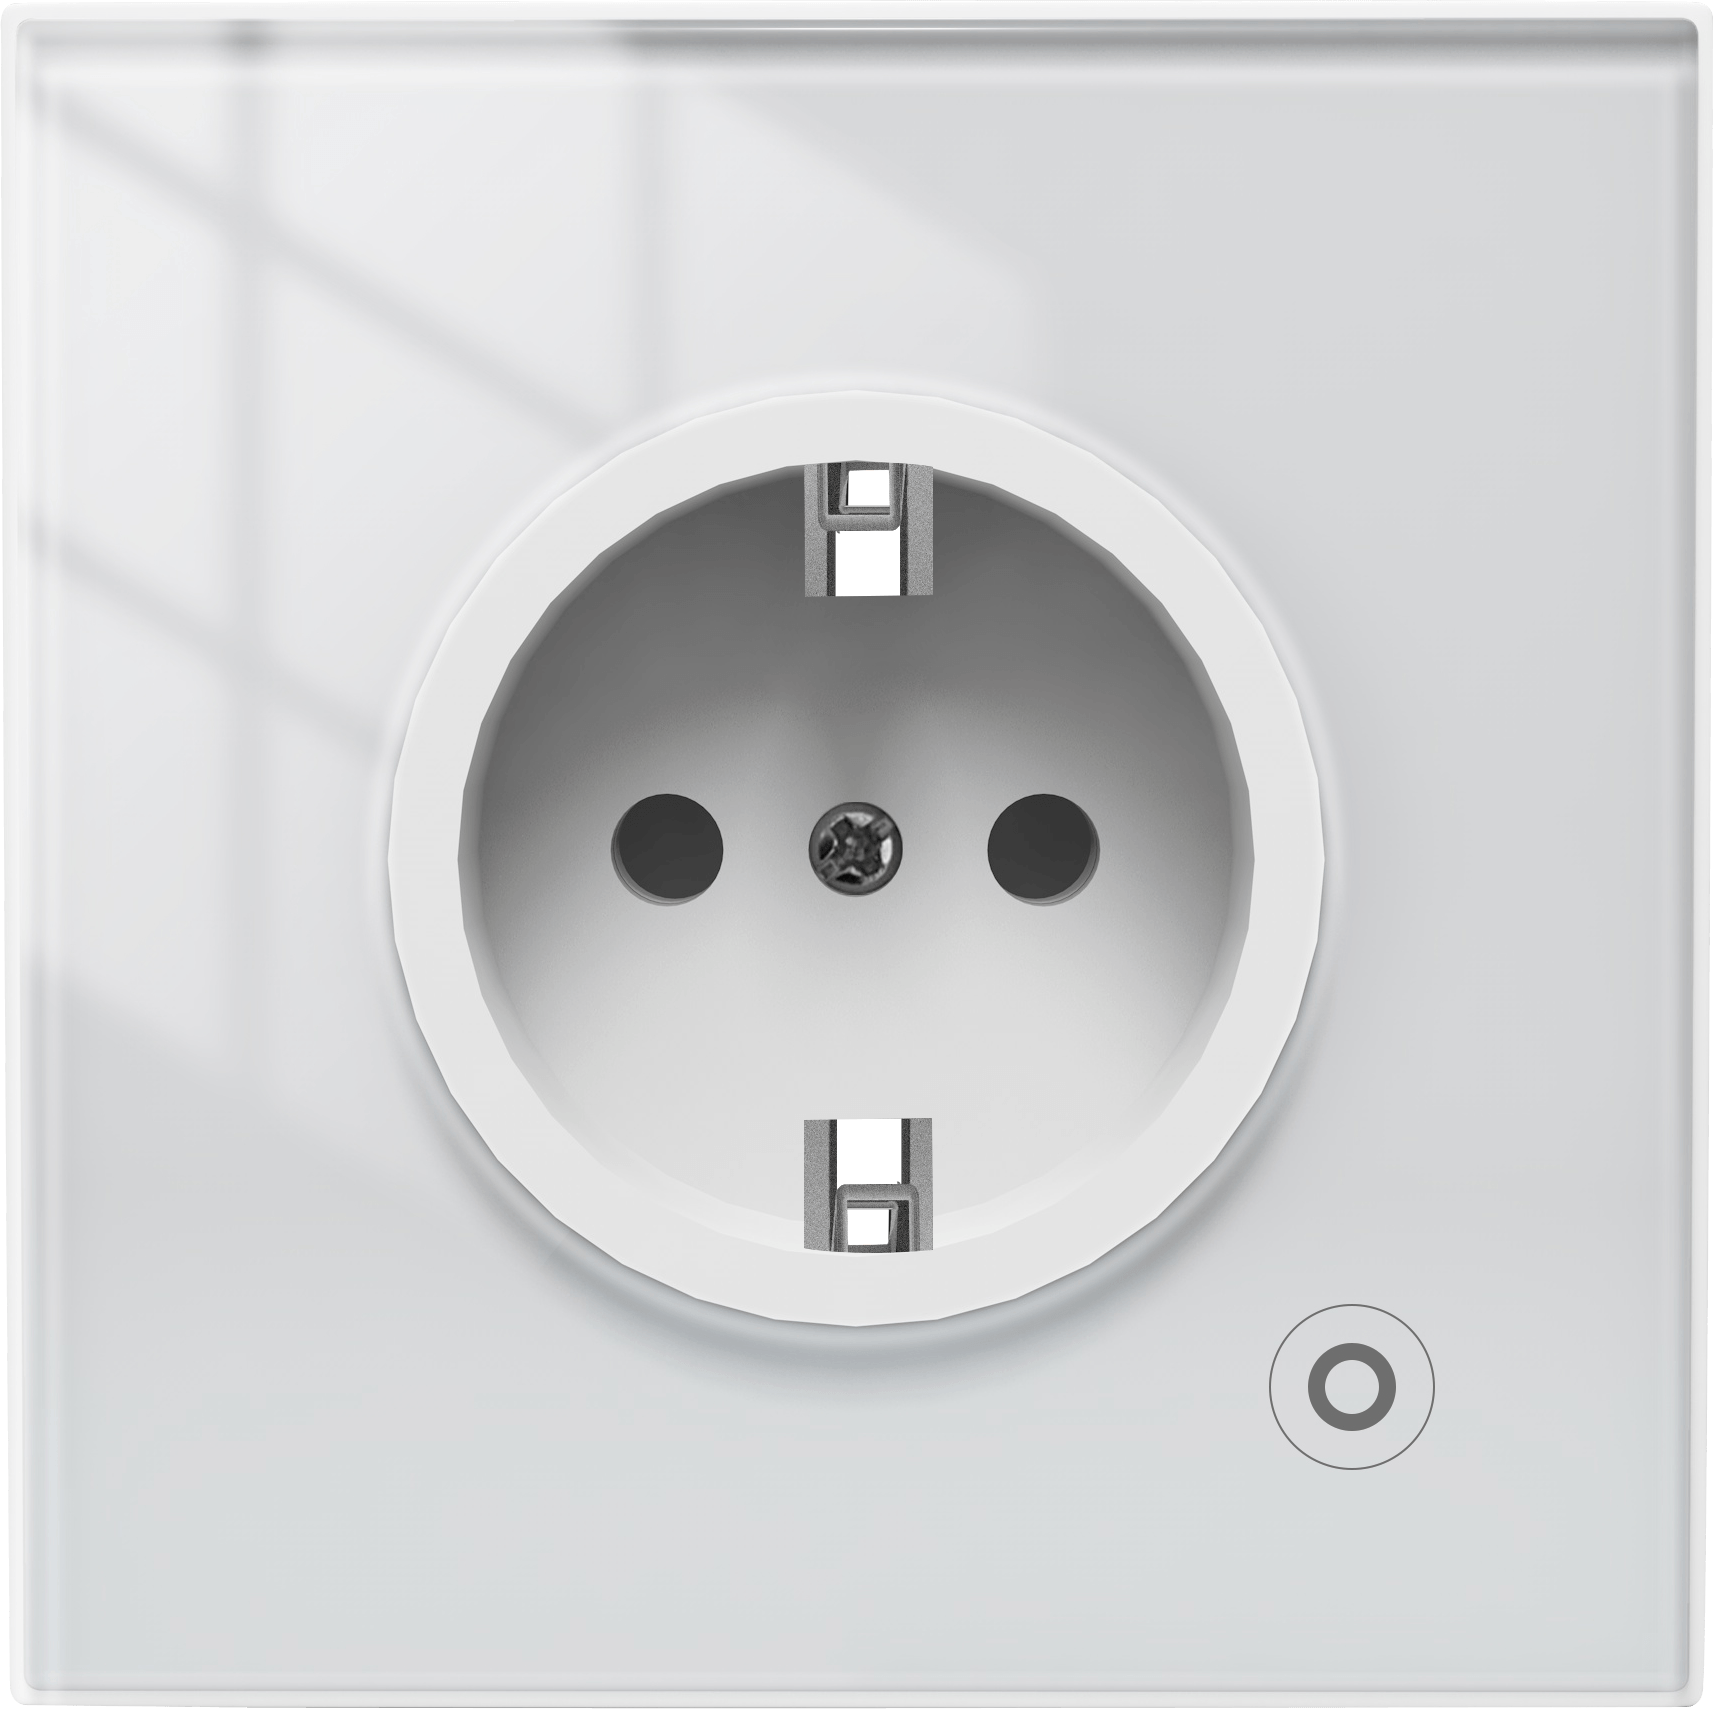 Smart WiFi Wall Outlet Socket with Electric Power Monitor - Moes